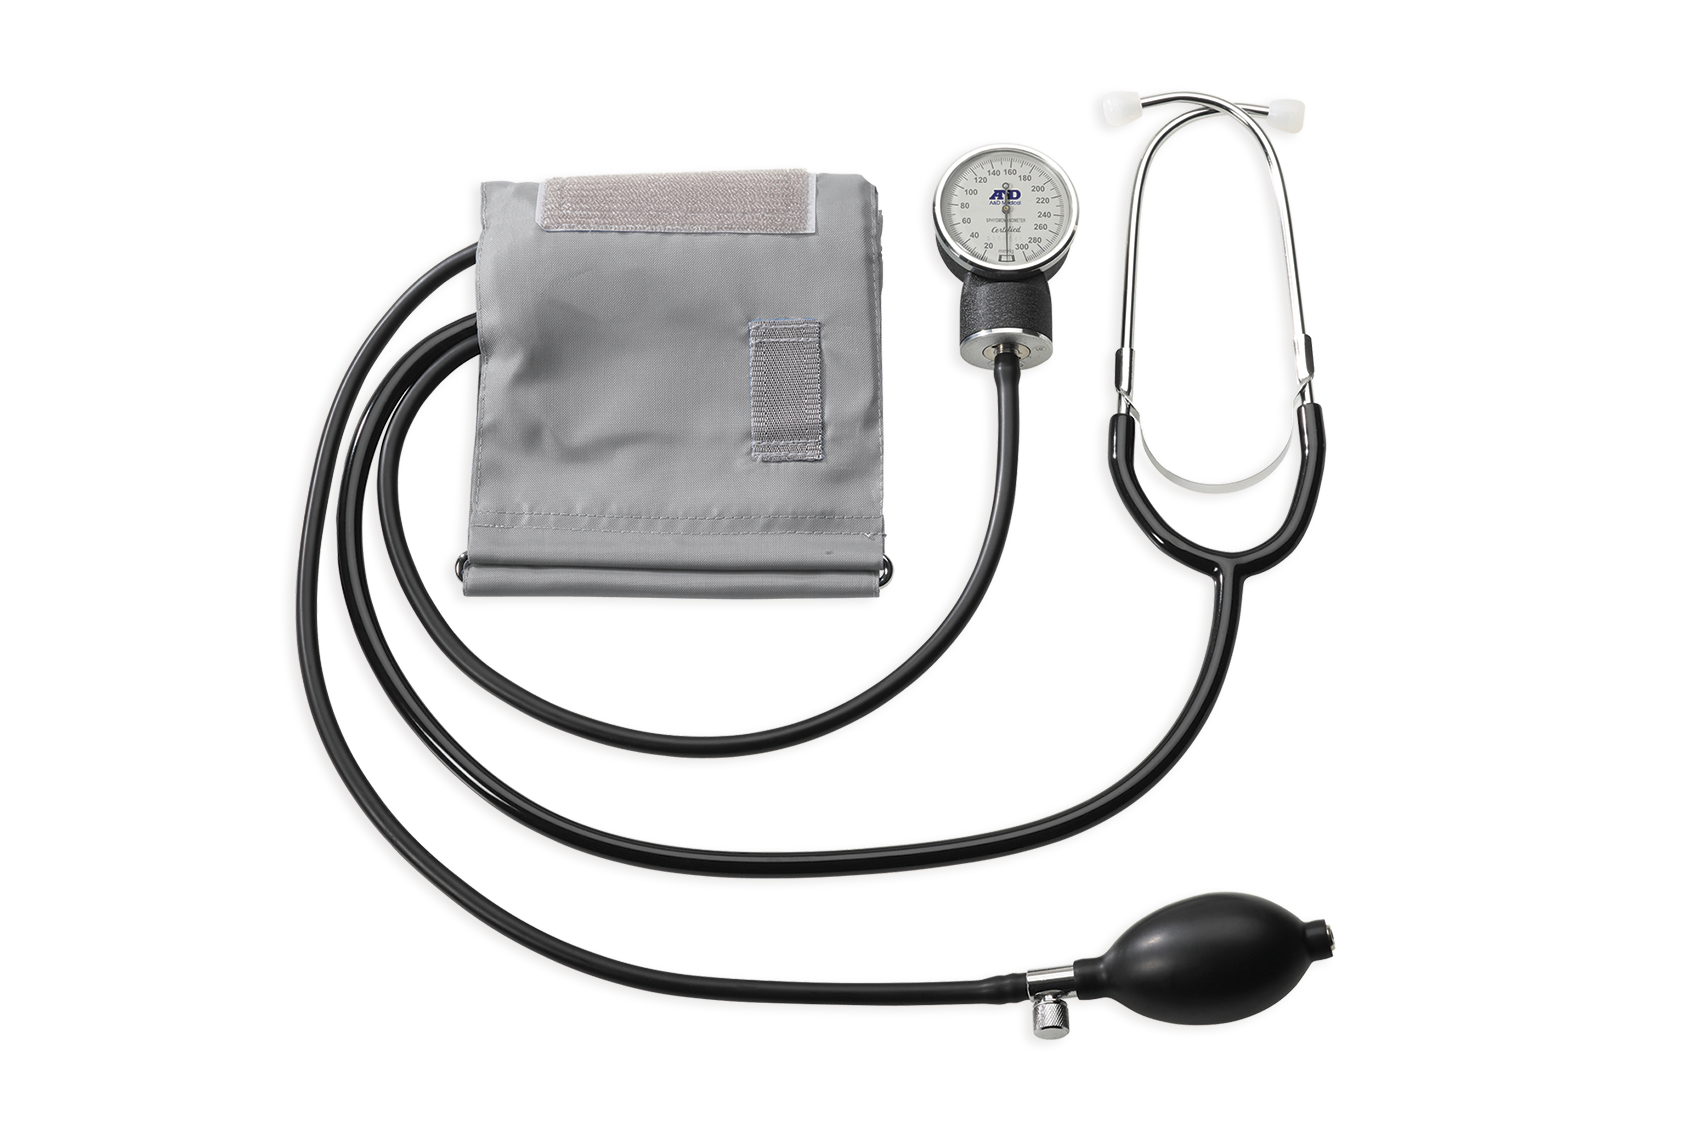 Professional, Medical Blood Pressure Devices & Cuffs